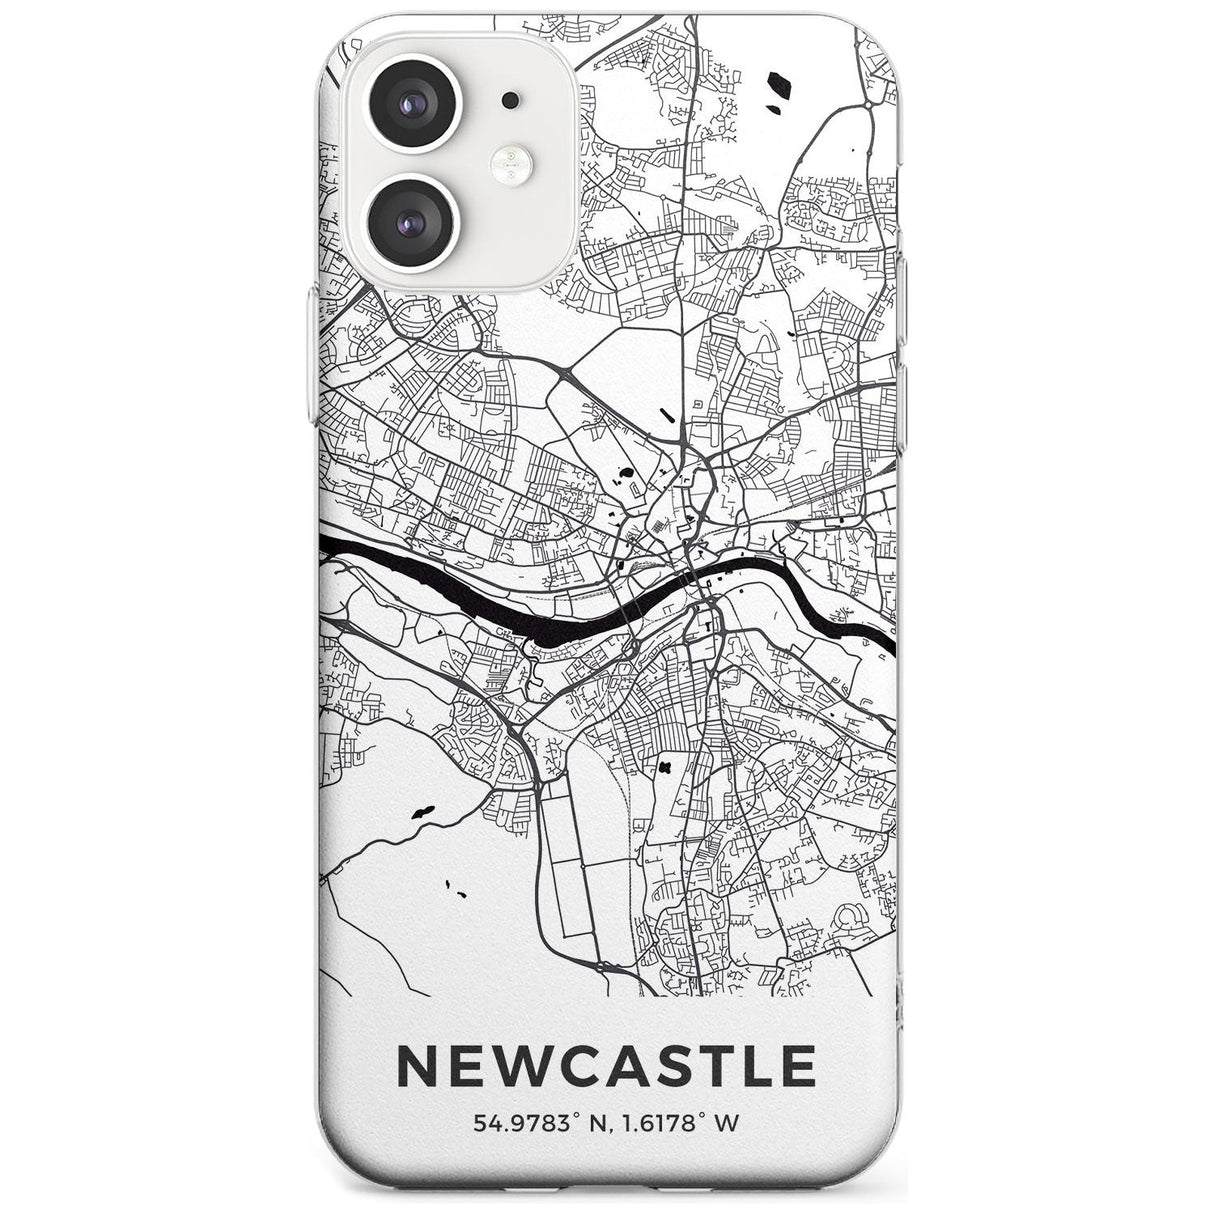 Map of Newcastle, England Slim TPU Phone Case for iPhone 11